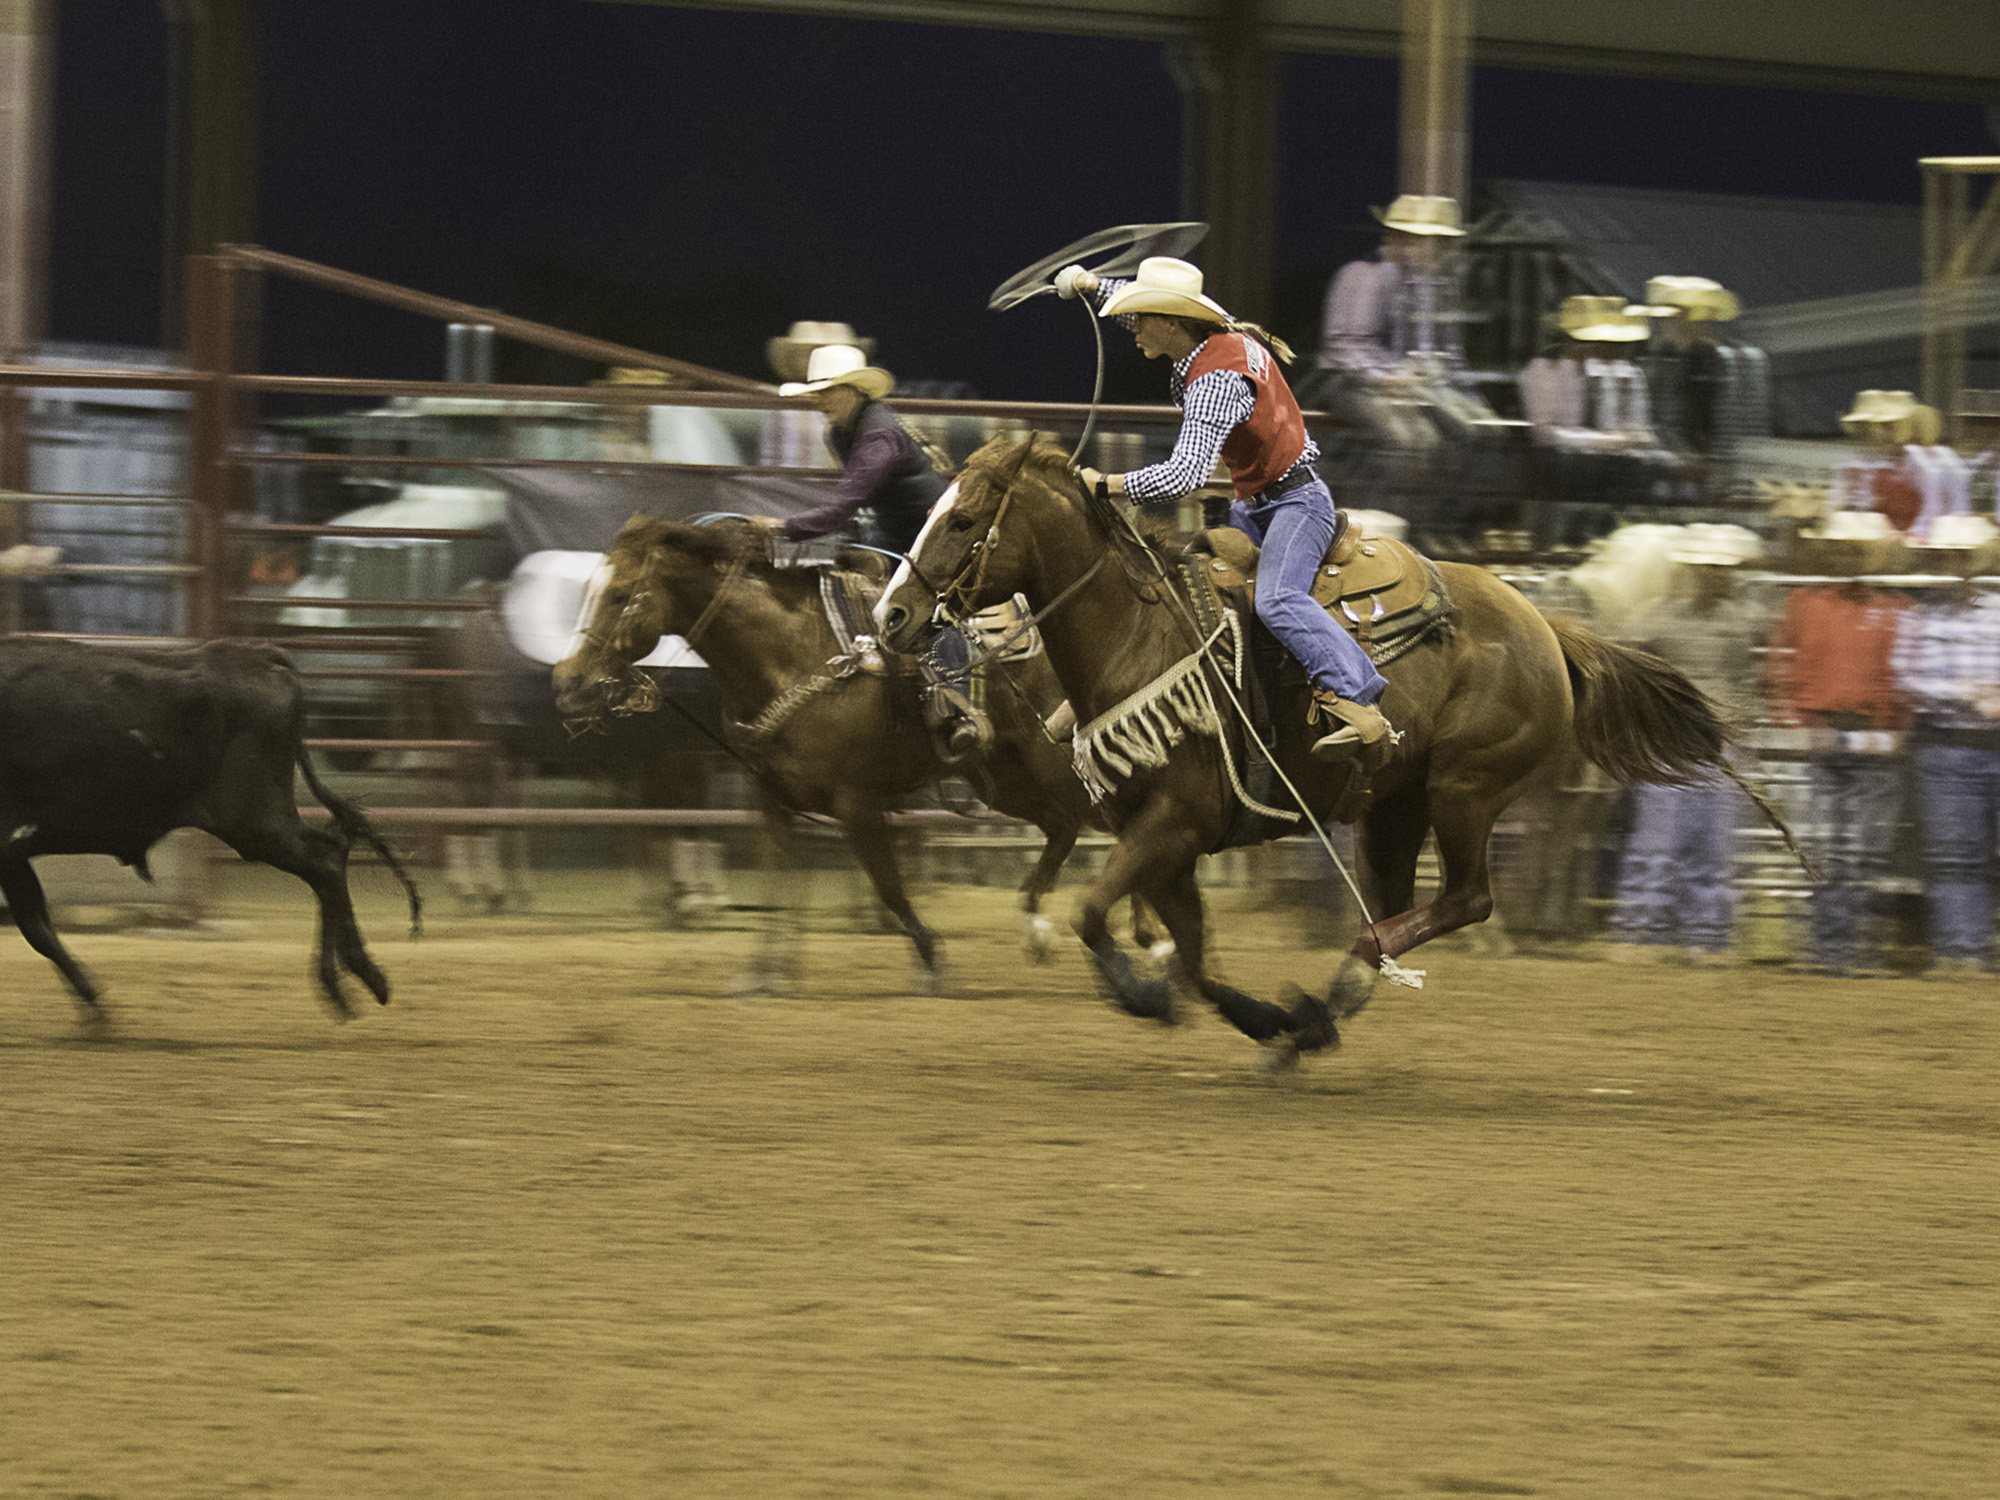 Get roped in! Saddle up with our Pioneer Cowboys and Cowgirls!